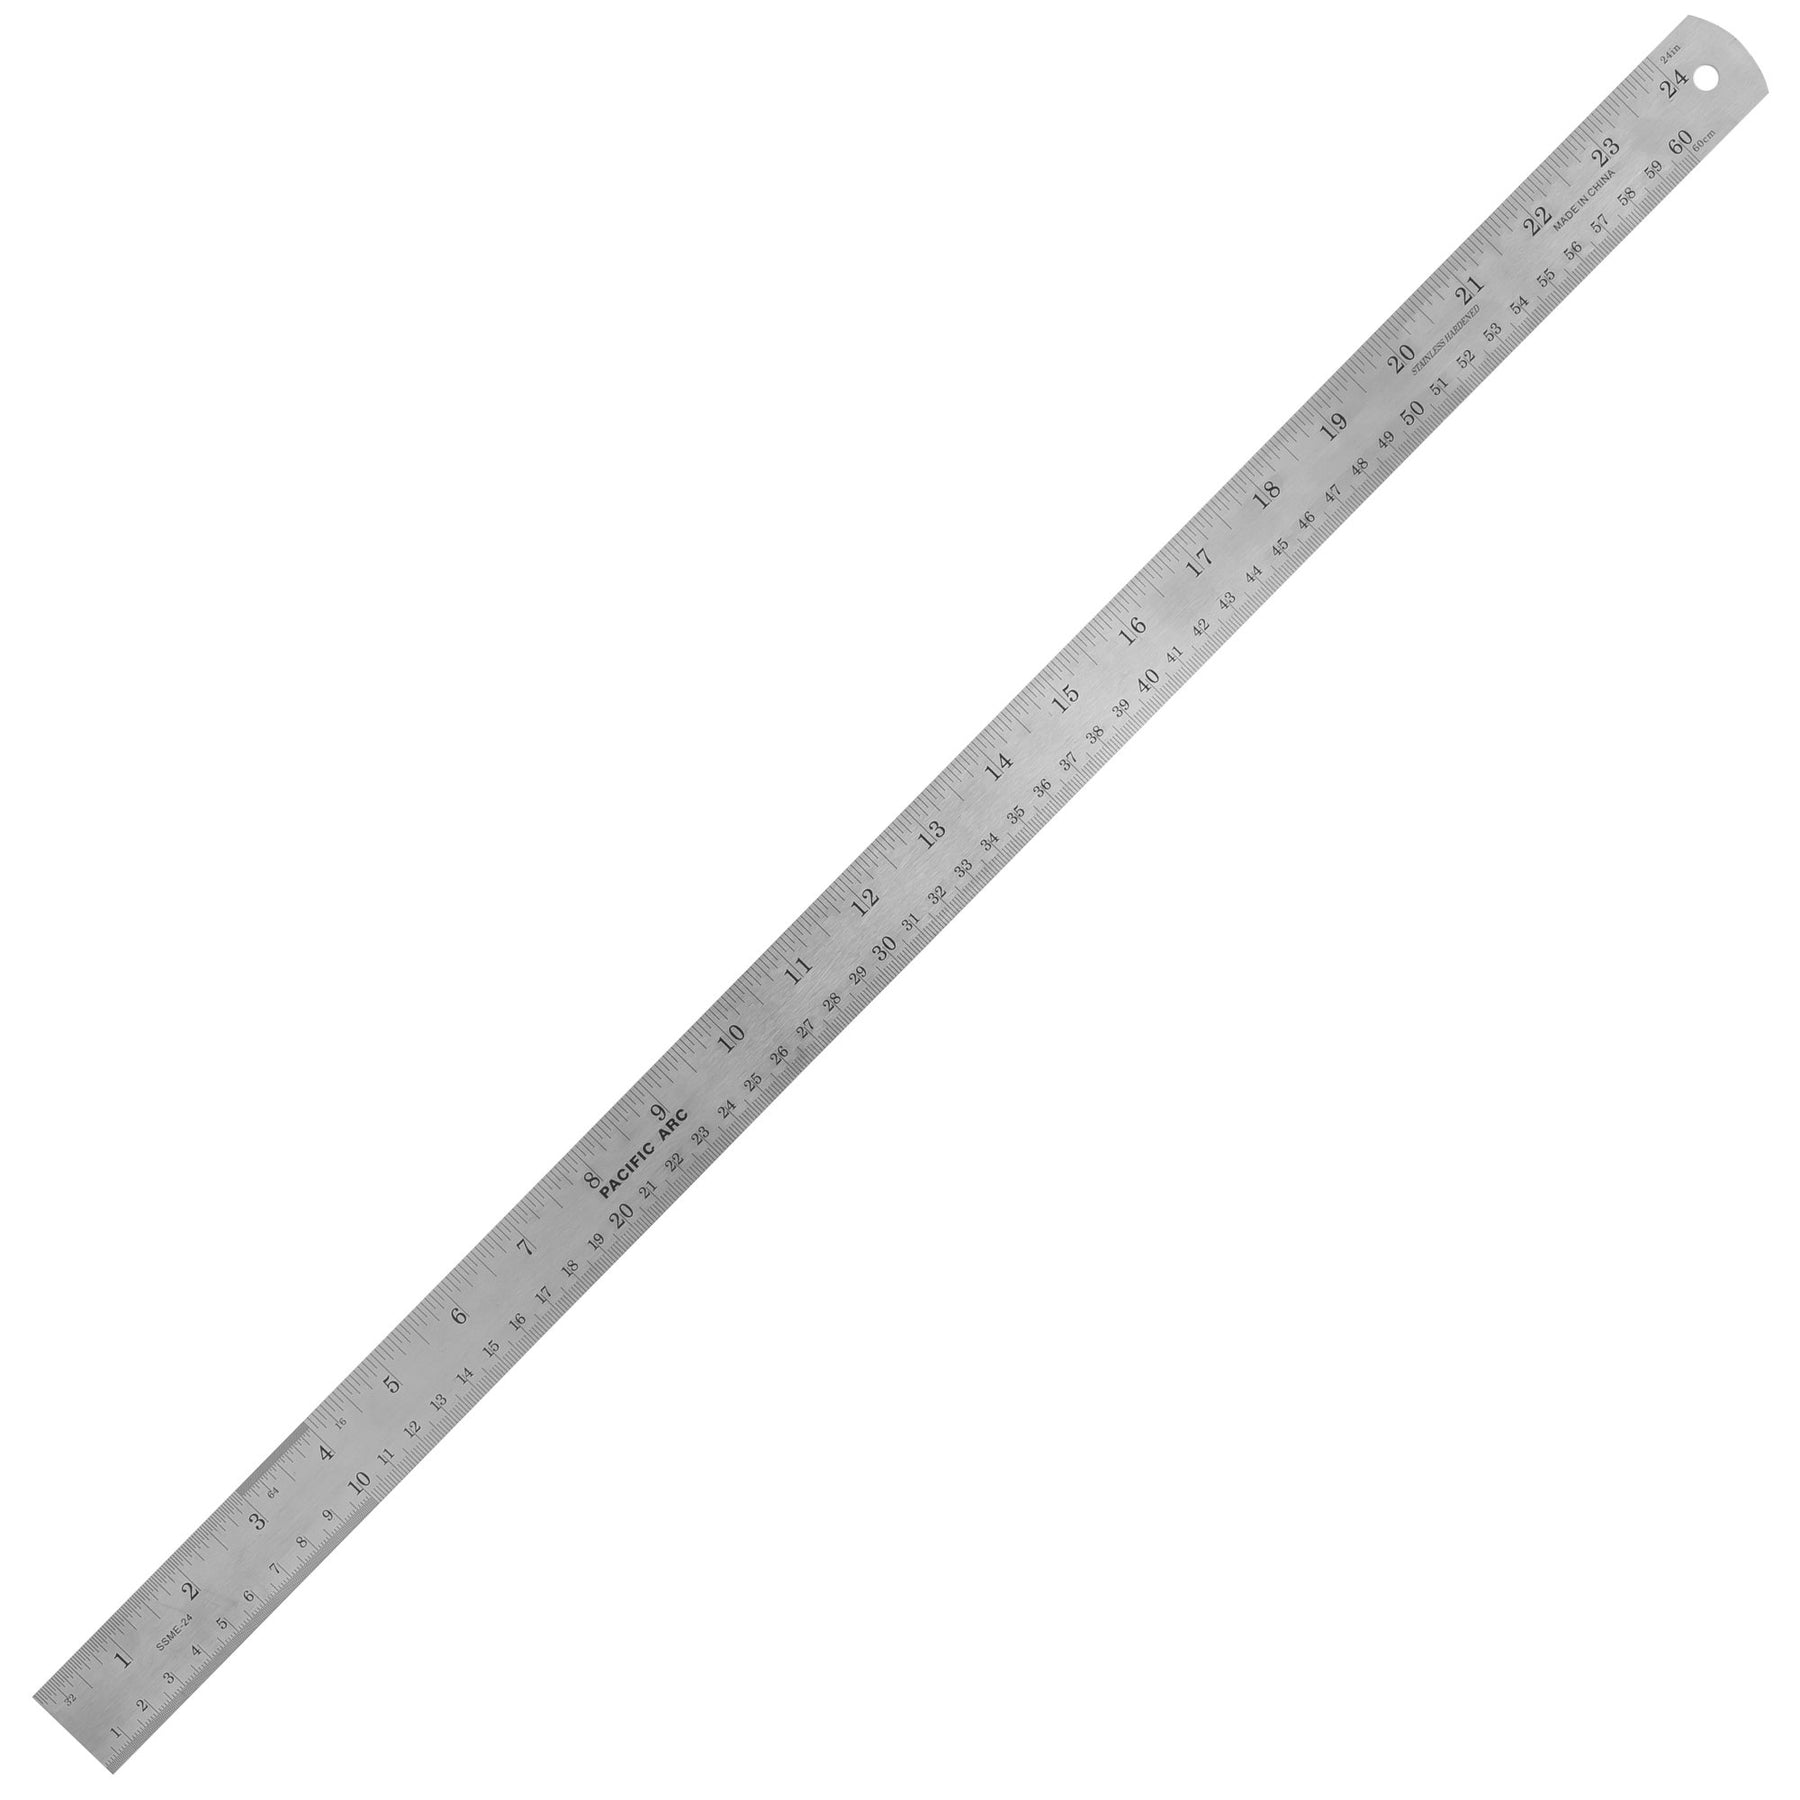 PACIFIC ARC Stainless Steel Rulers Inch/Metric with Conversion Table